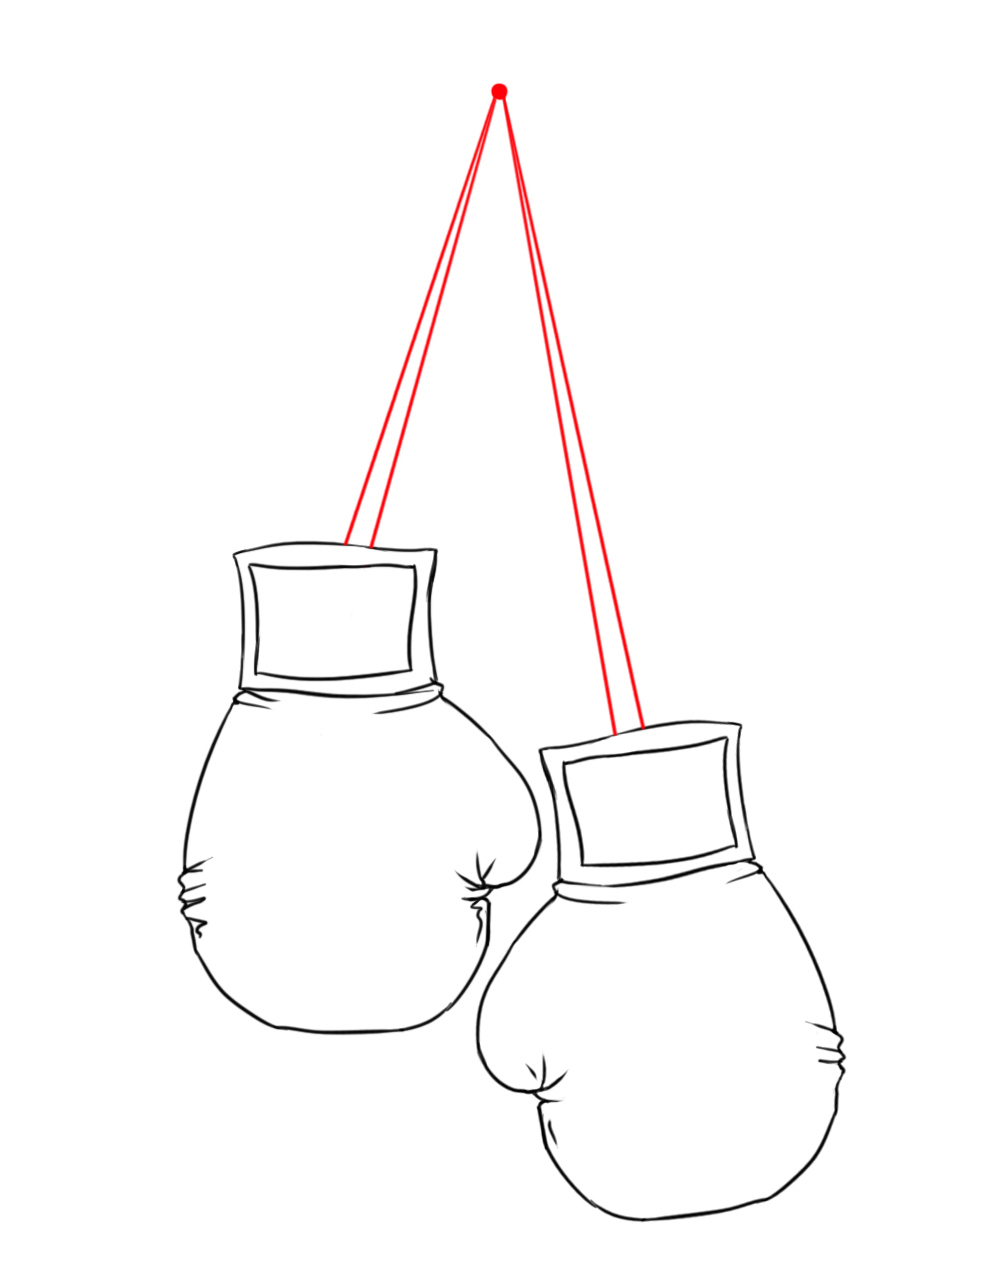 Boxing Glove Drawing at GetDrawings Free download